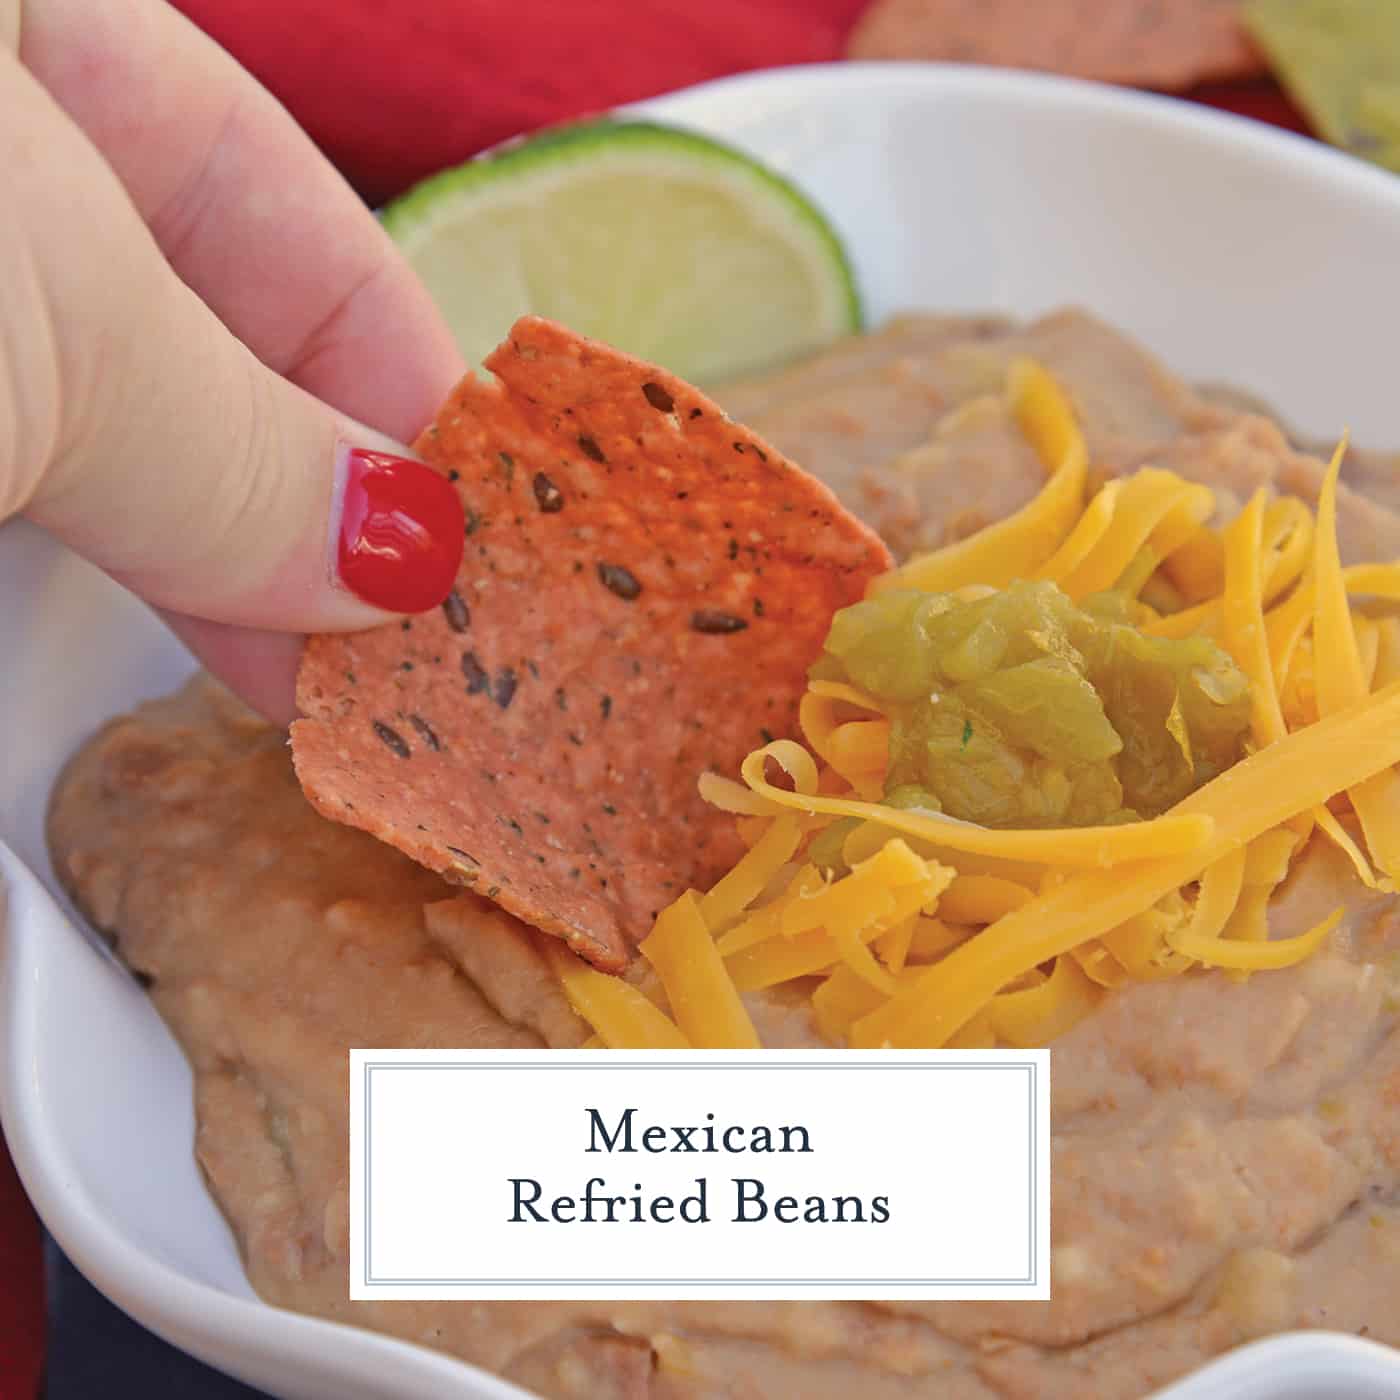 Mexican Refried Beans are an easy homemade refried bean recipe using pinto beans, green chilies, cheese and Mexican spices. Ready in just 15 minutes! #refriedbeans #mexicansidedish www.savoryexperiments.com 